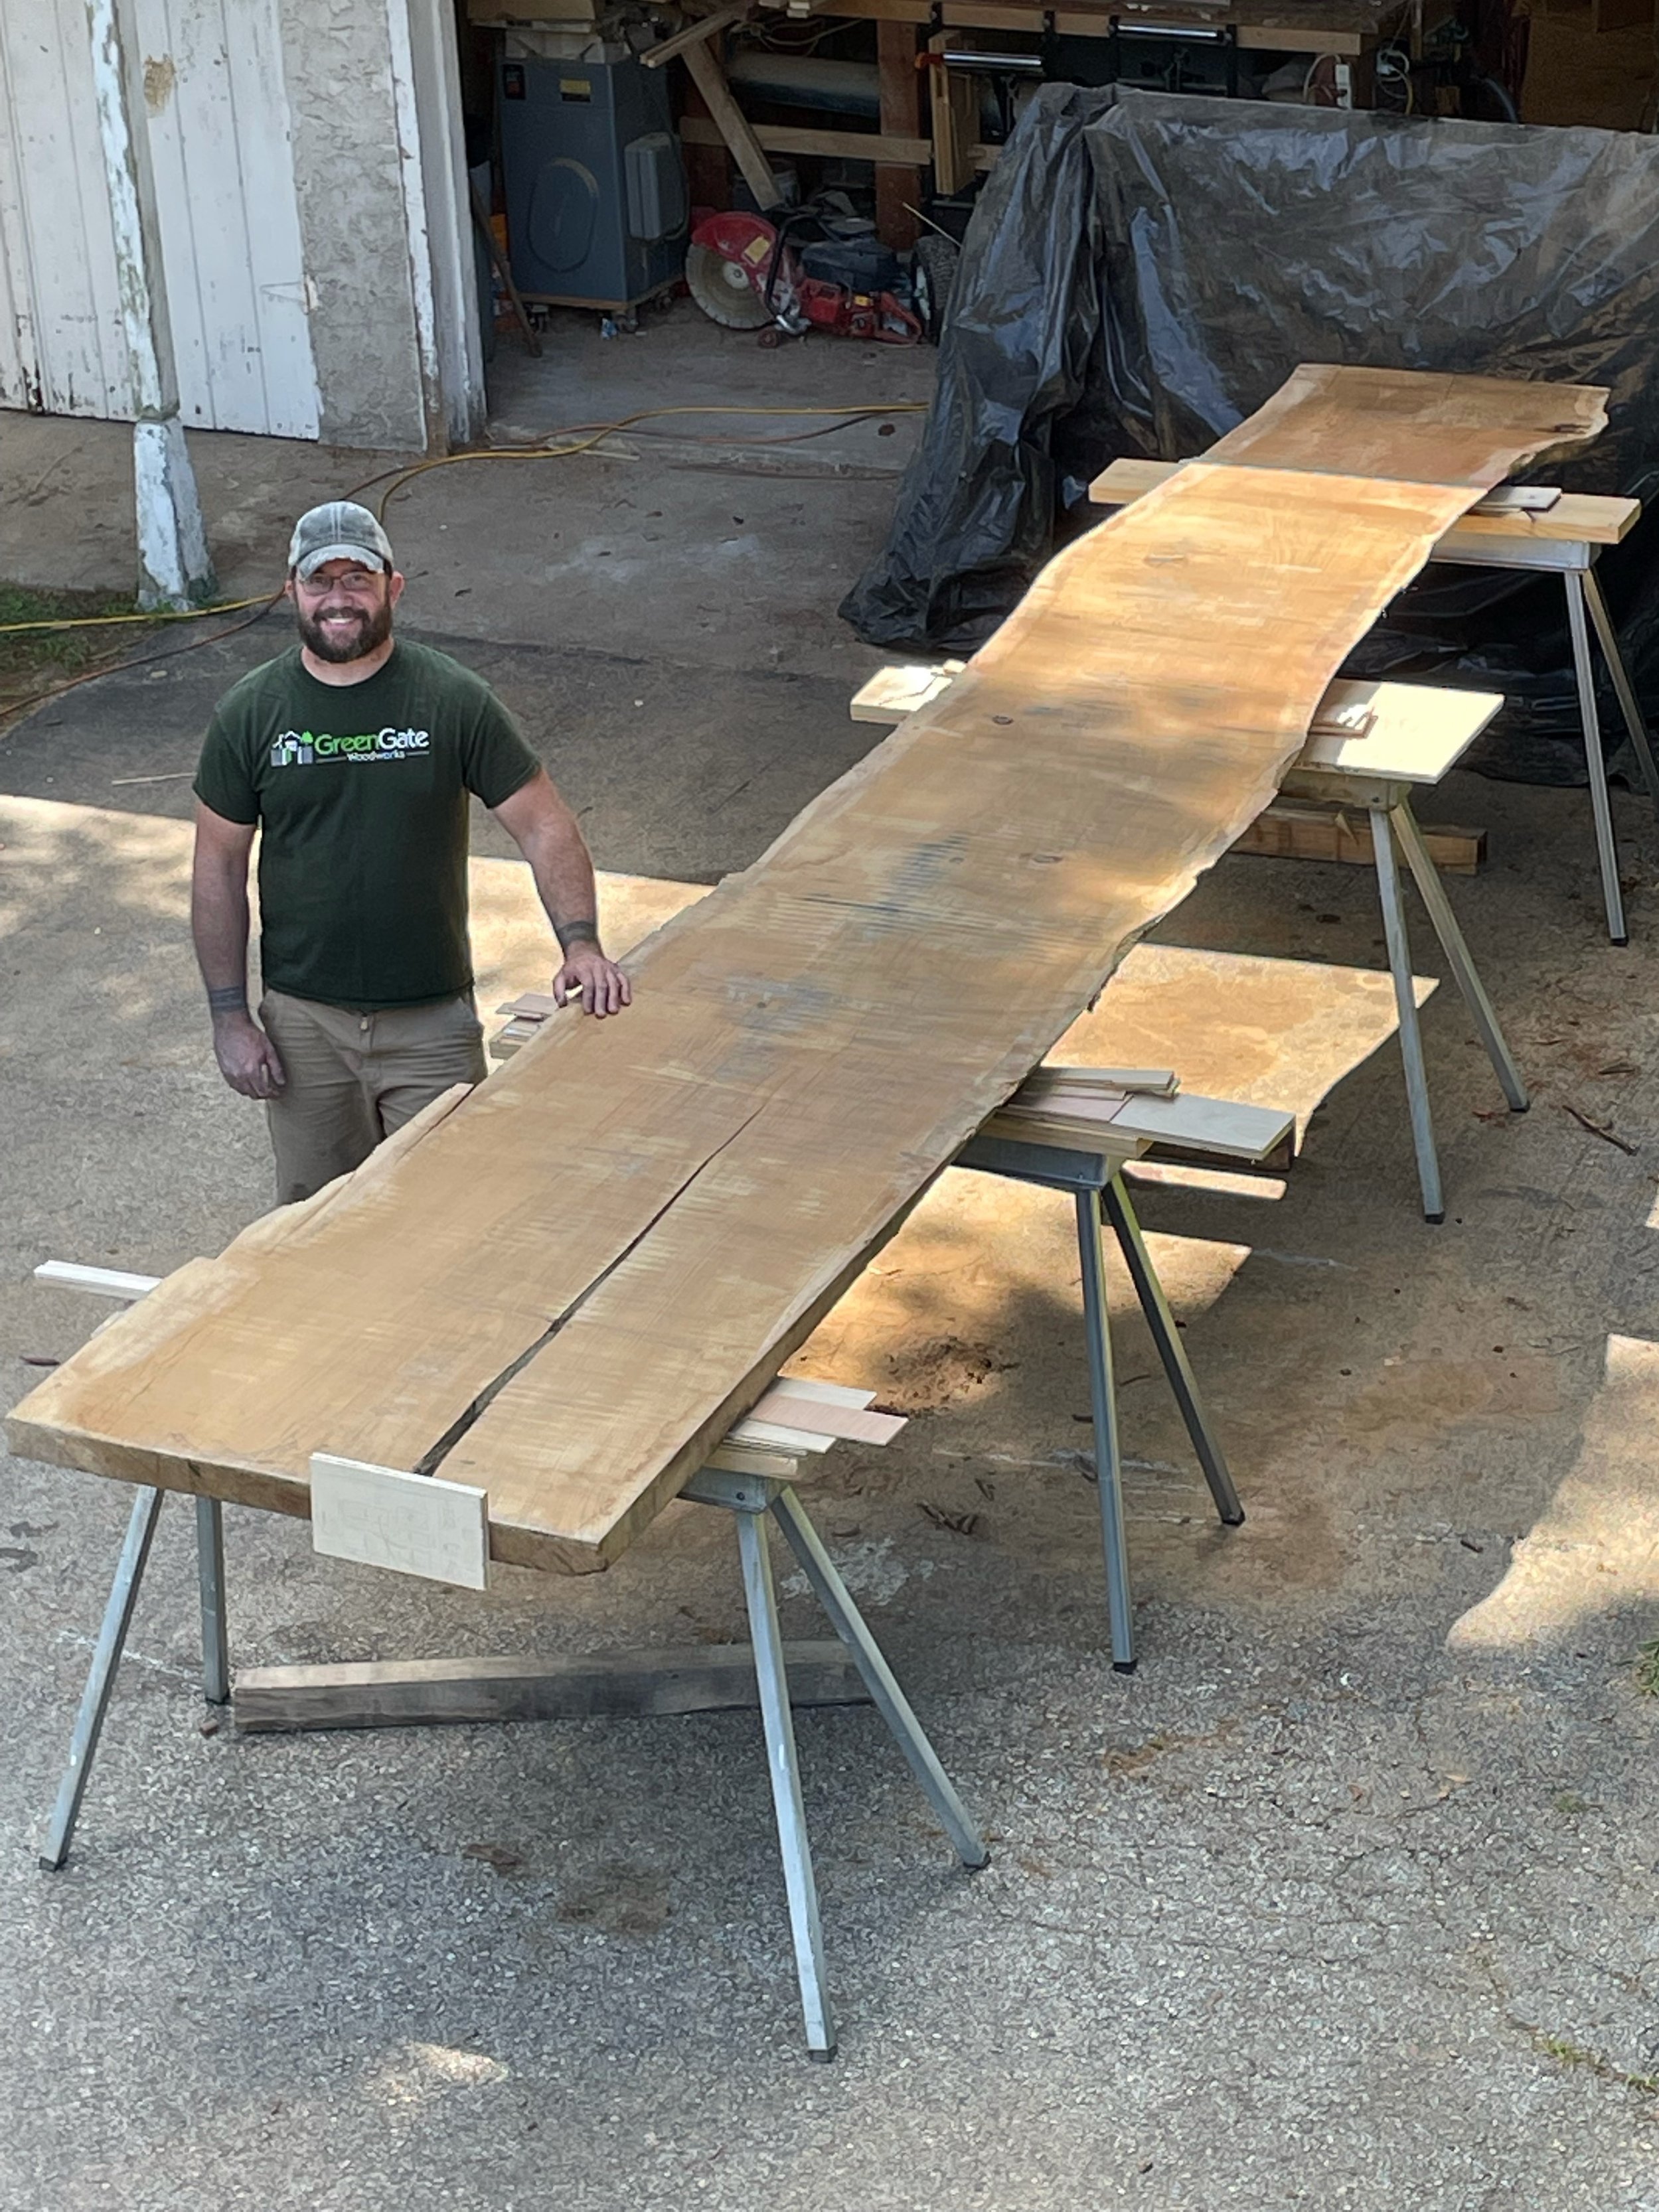  I was hired to make a set of office built-ins for a client, and they wanted to have a live-edge slab for the countertop. I found this large white oak slab which would fit the bill, but because it was so big I couldn’t fit it in my shop. My wife had 